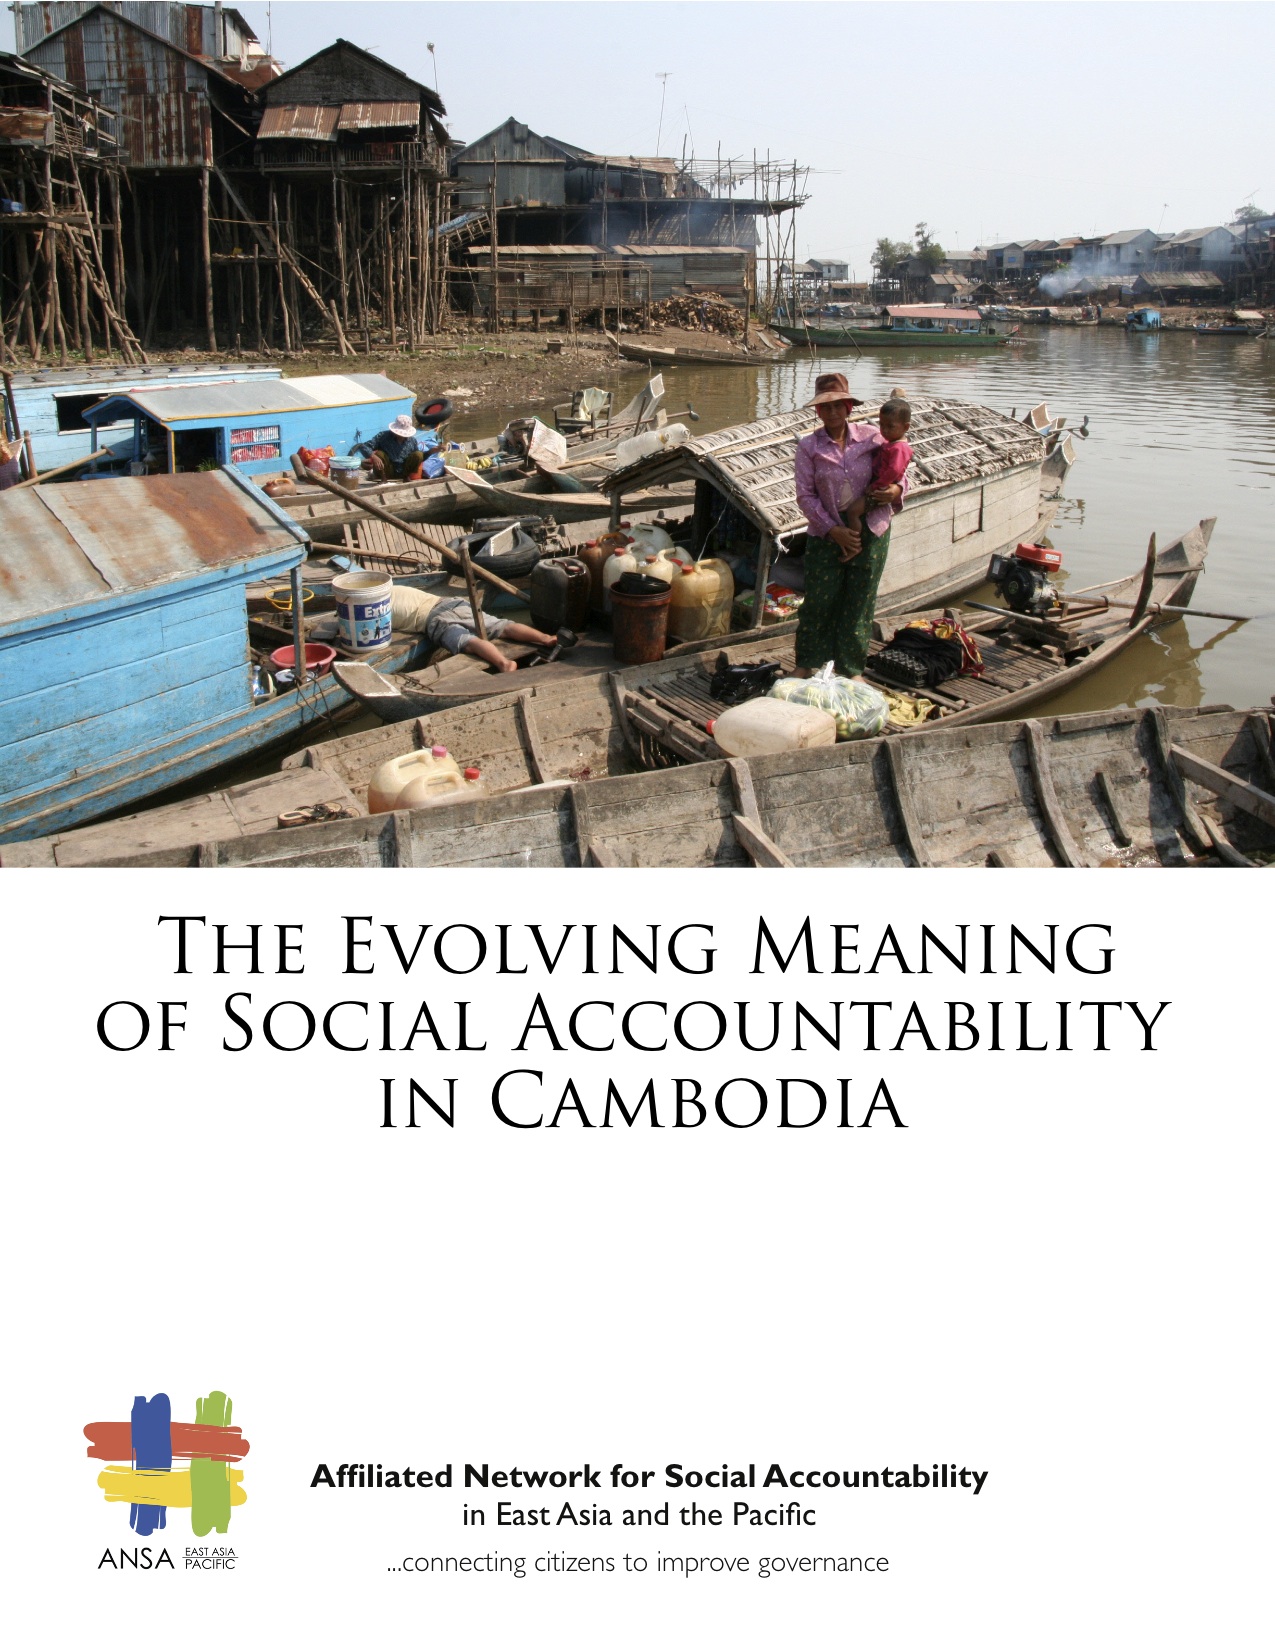 The Evolving Meaning of Social Accountability in Cambodia